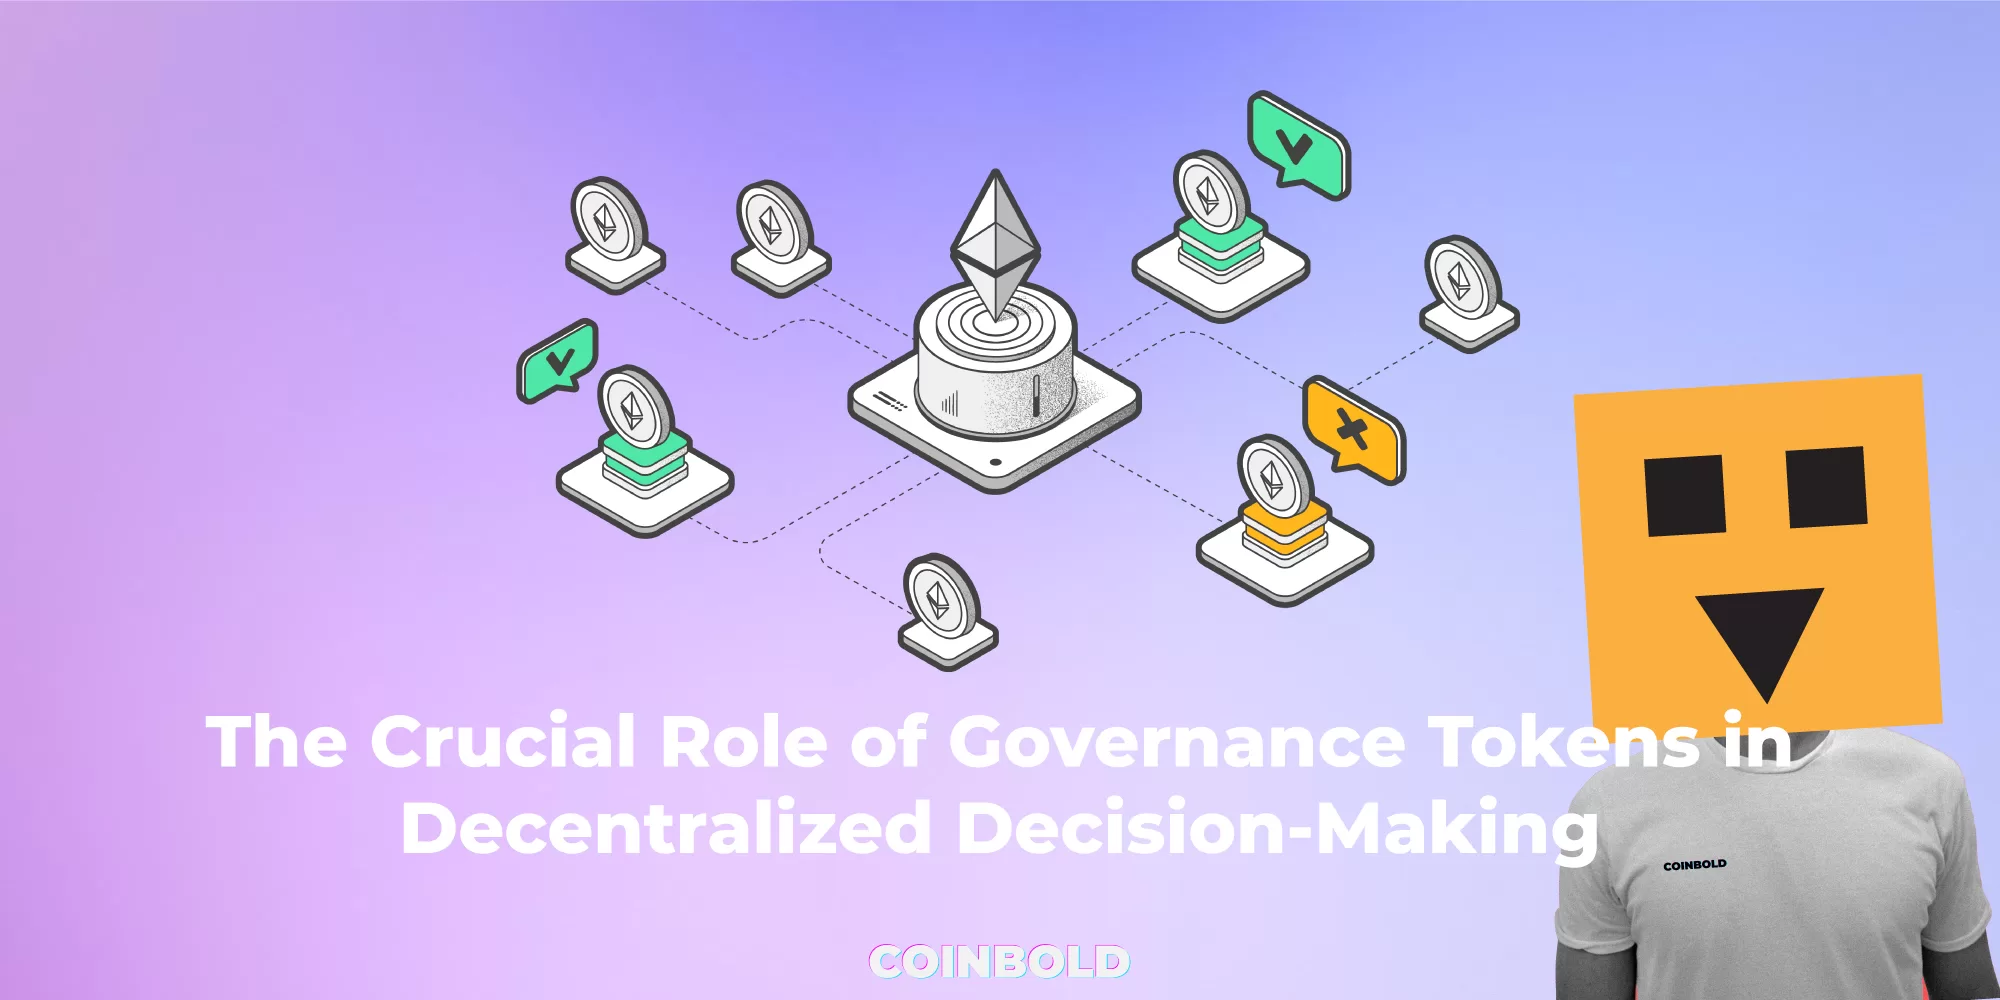 The Crucial Role of Governance Tokens in Decentralized Decision-Making